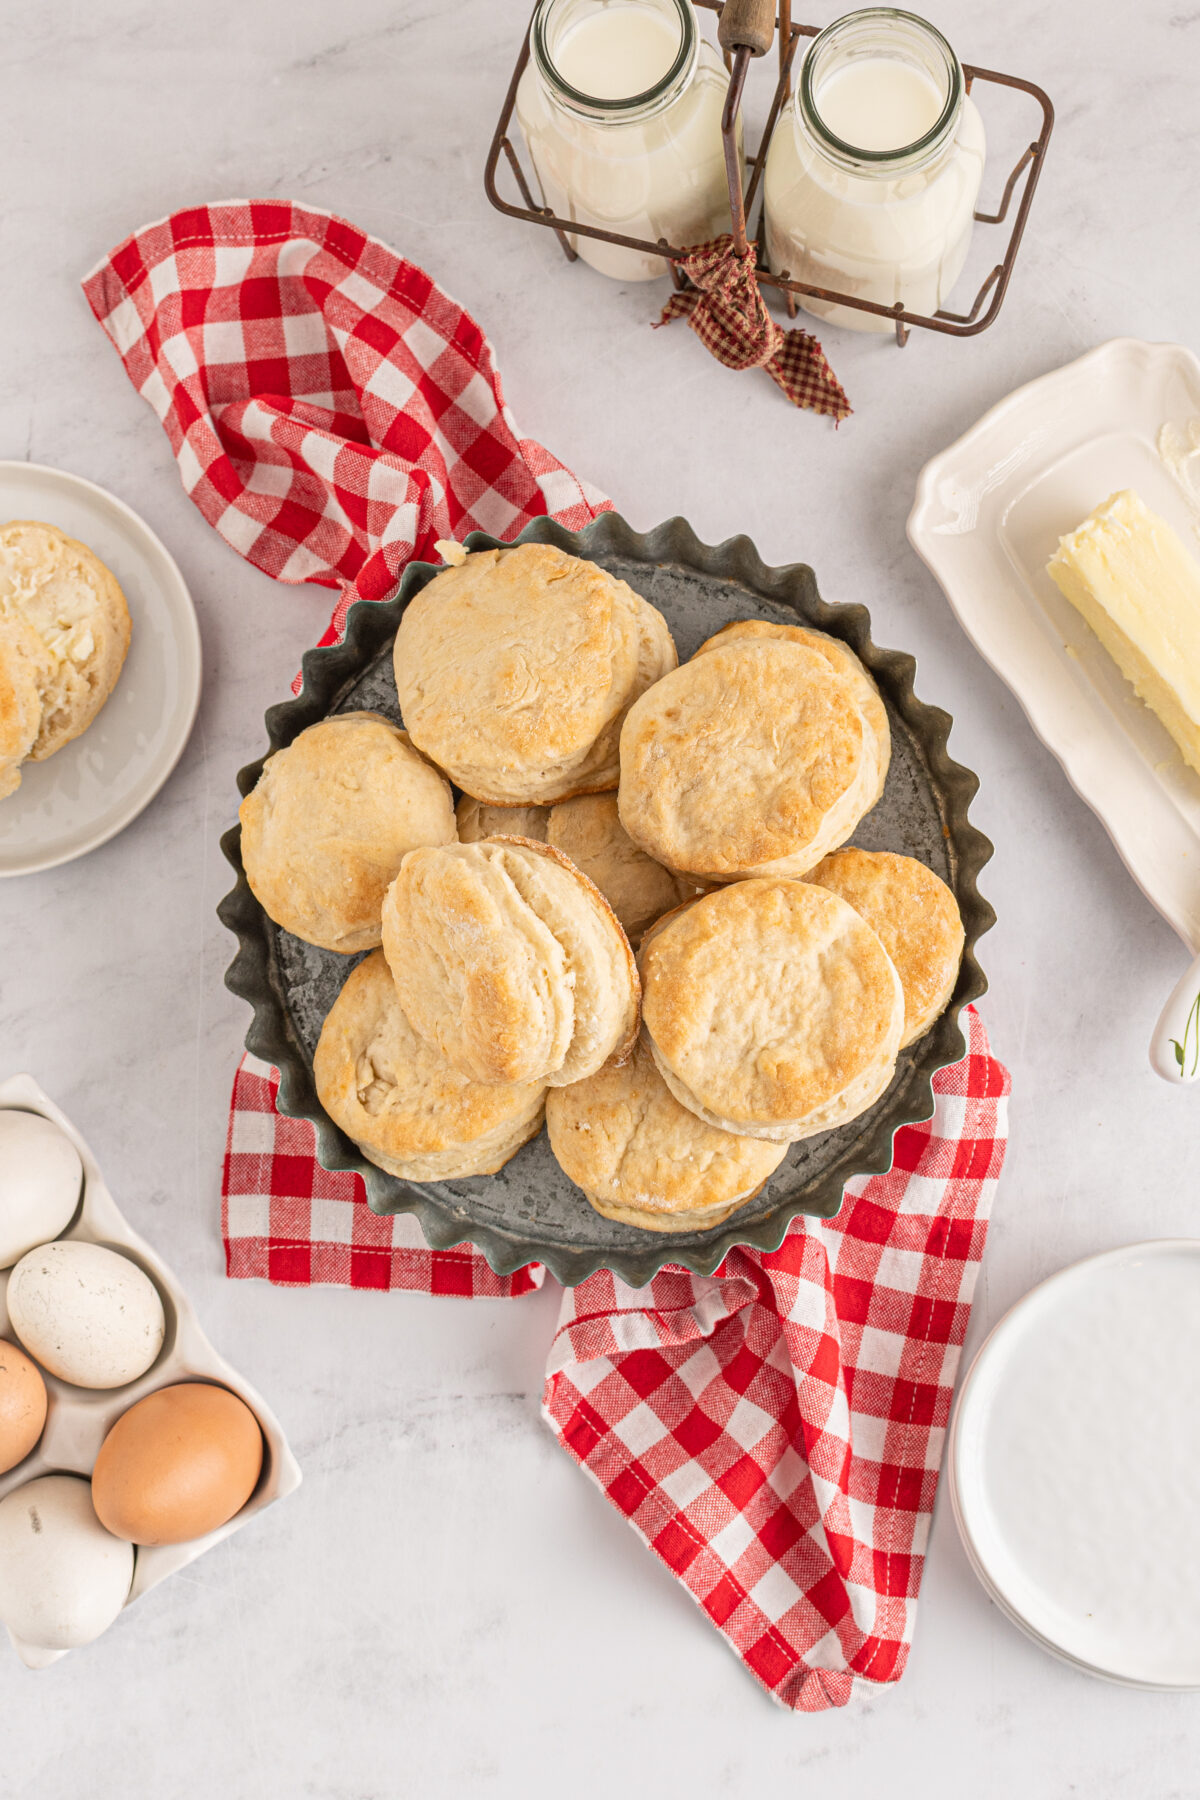 This easy 7-Up biscuits recipe makes fluffy, golden biscuits made with just a few simple ingredients and are ready in about 30 minutes!